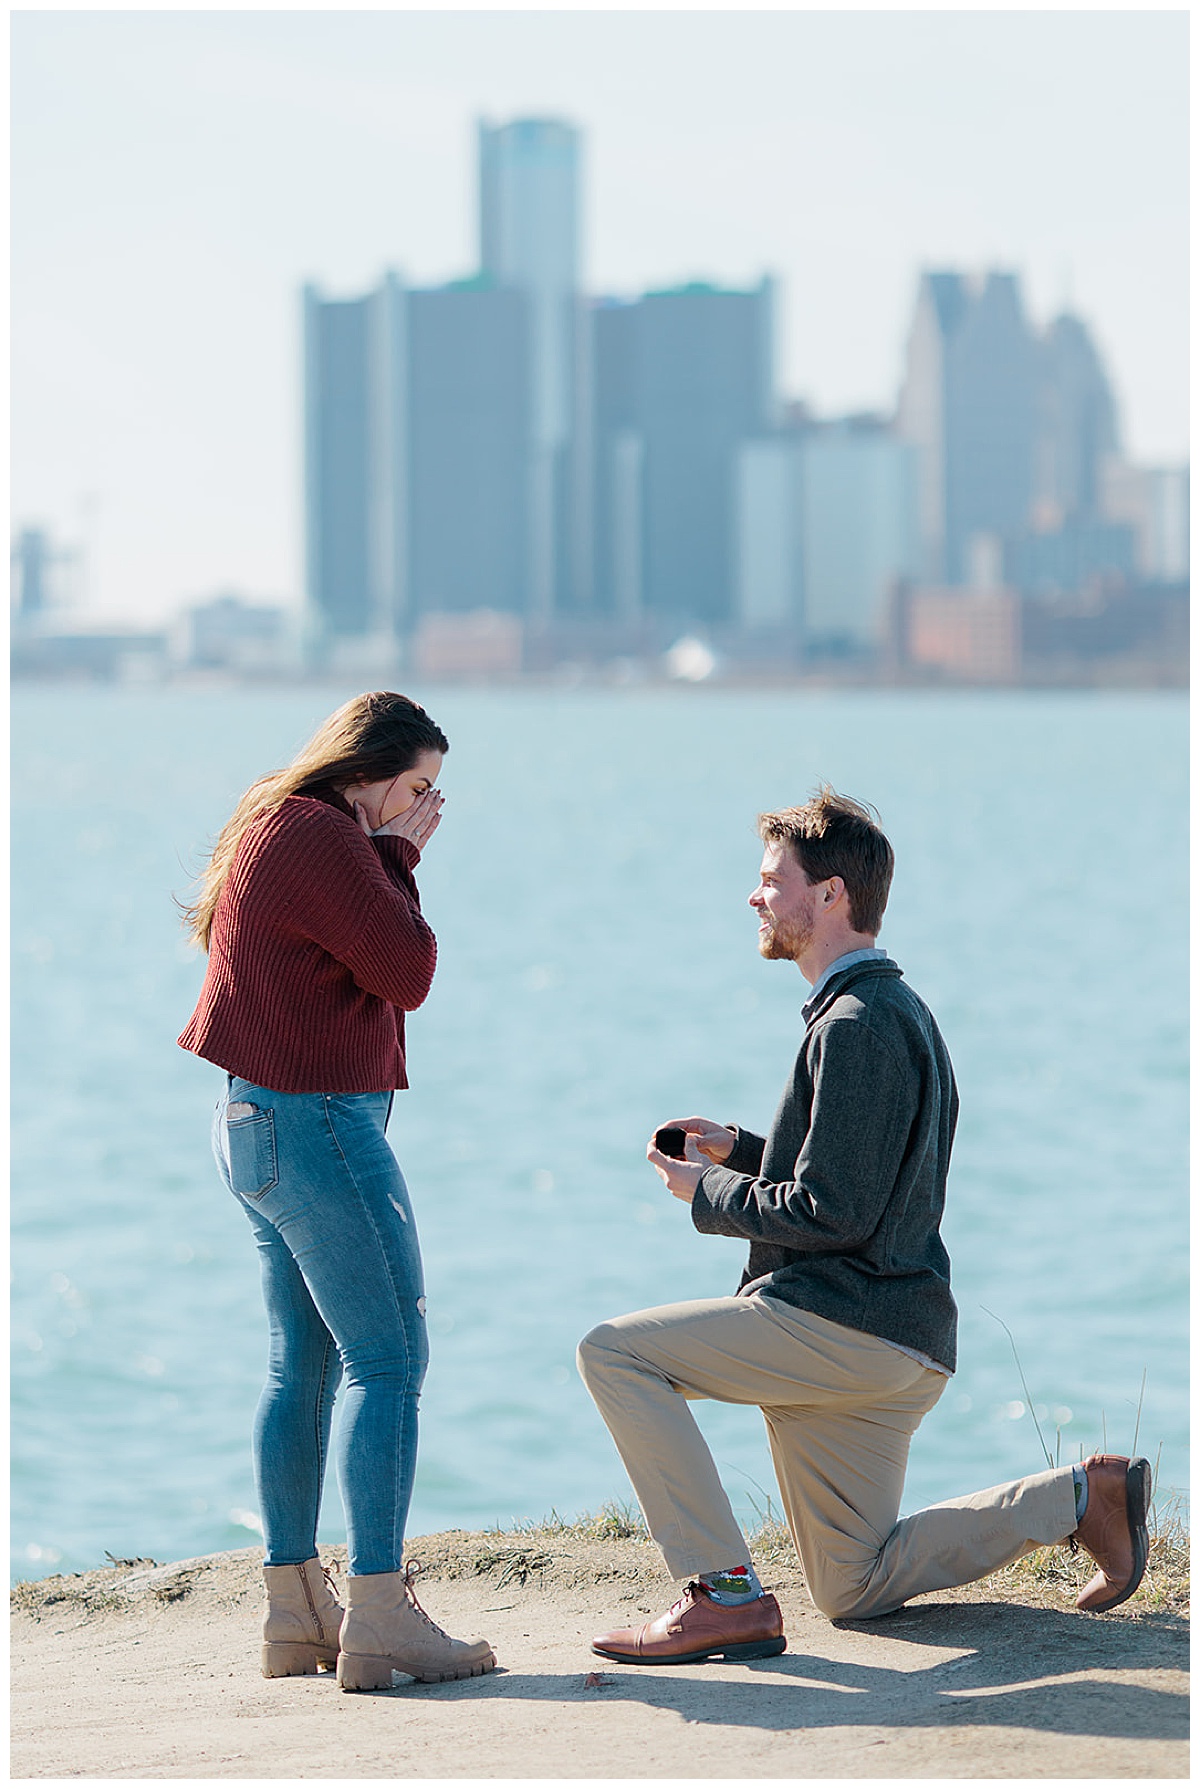 Man proposes to woman for Kayla Bouren Photography